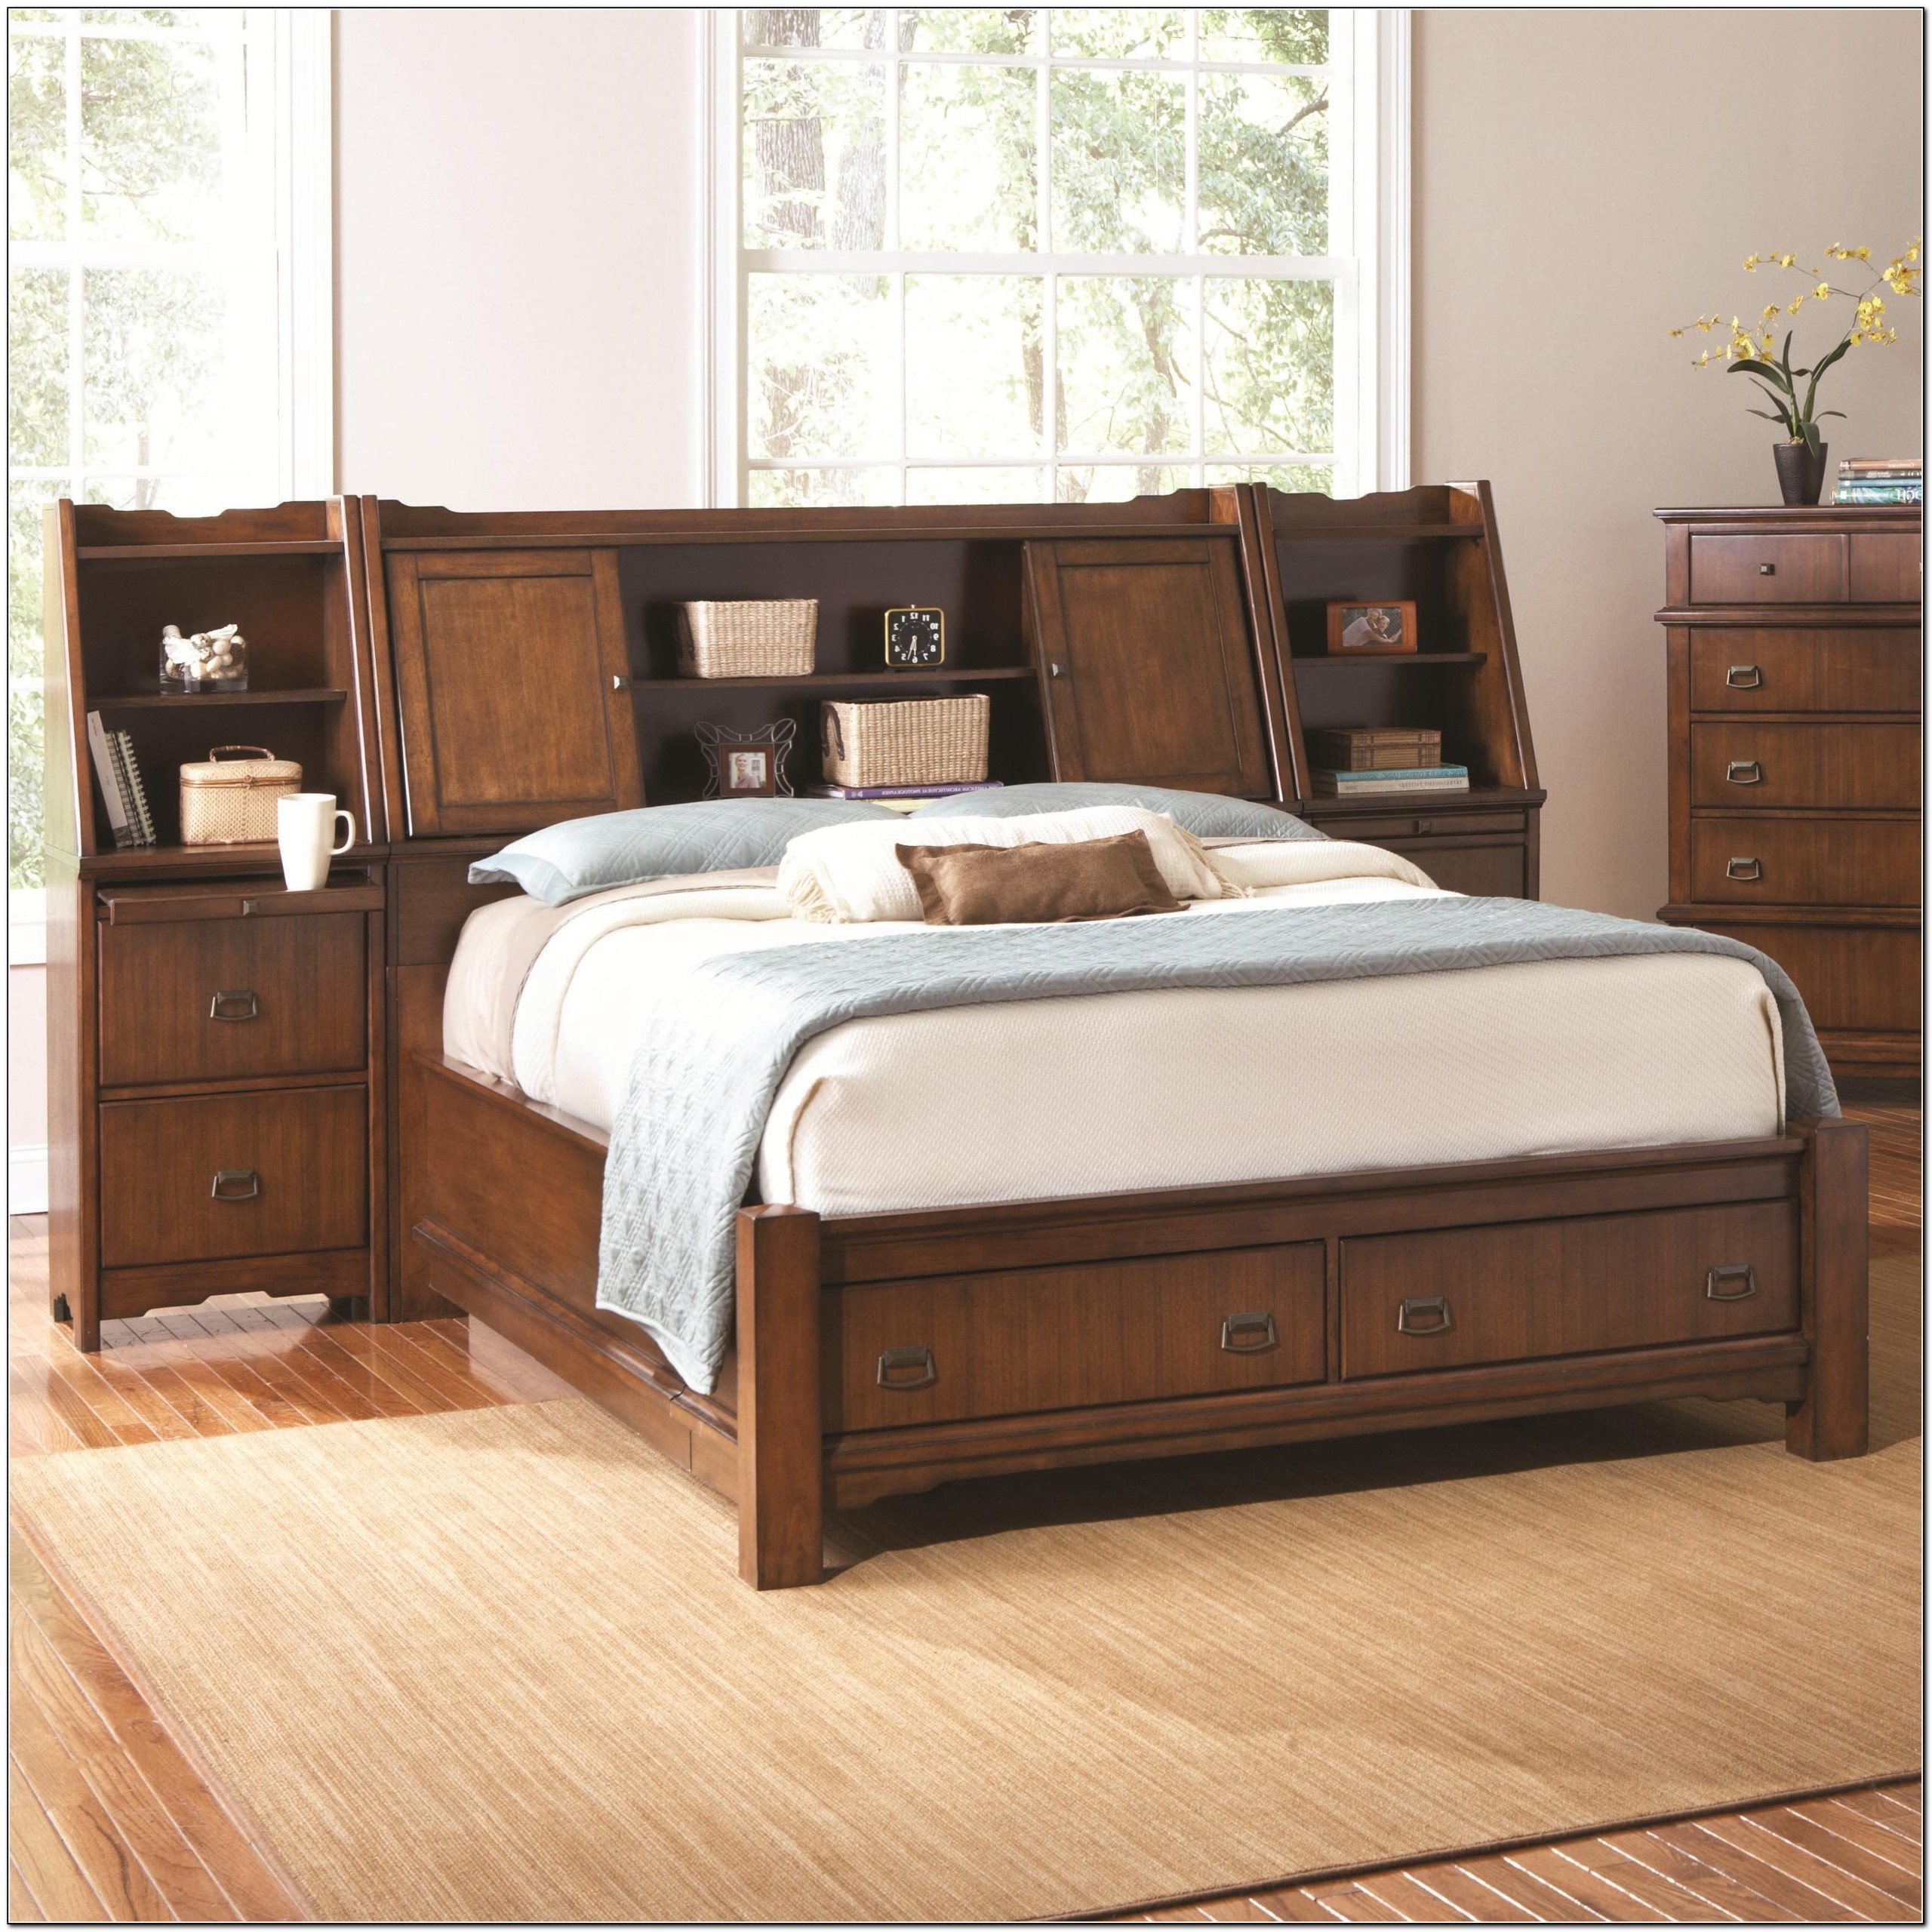 King storage bed with bookcase headboard beds home 2